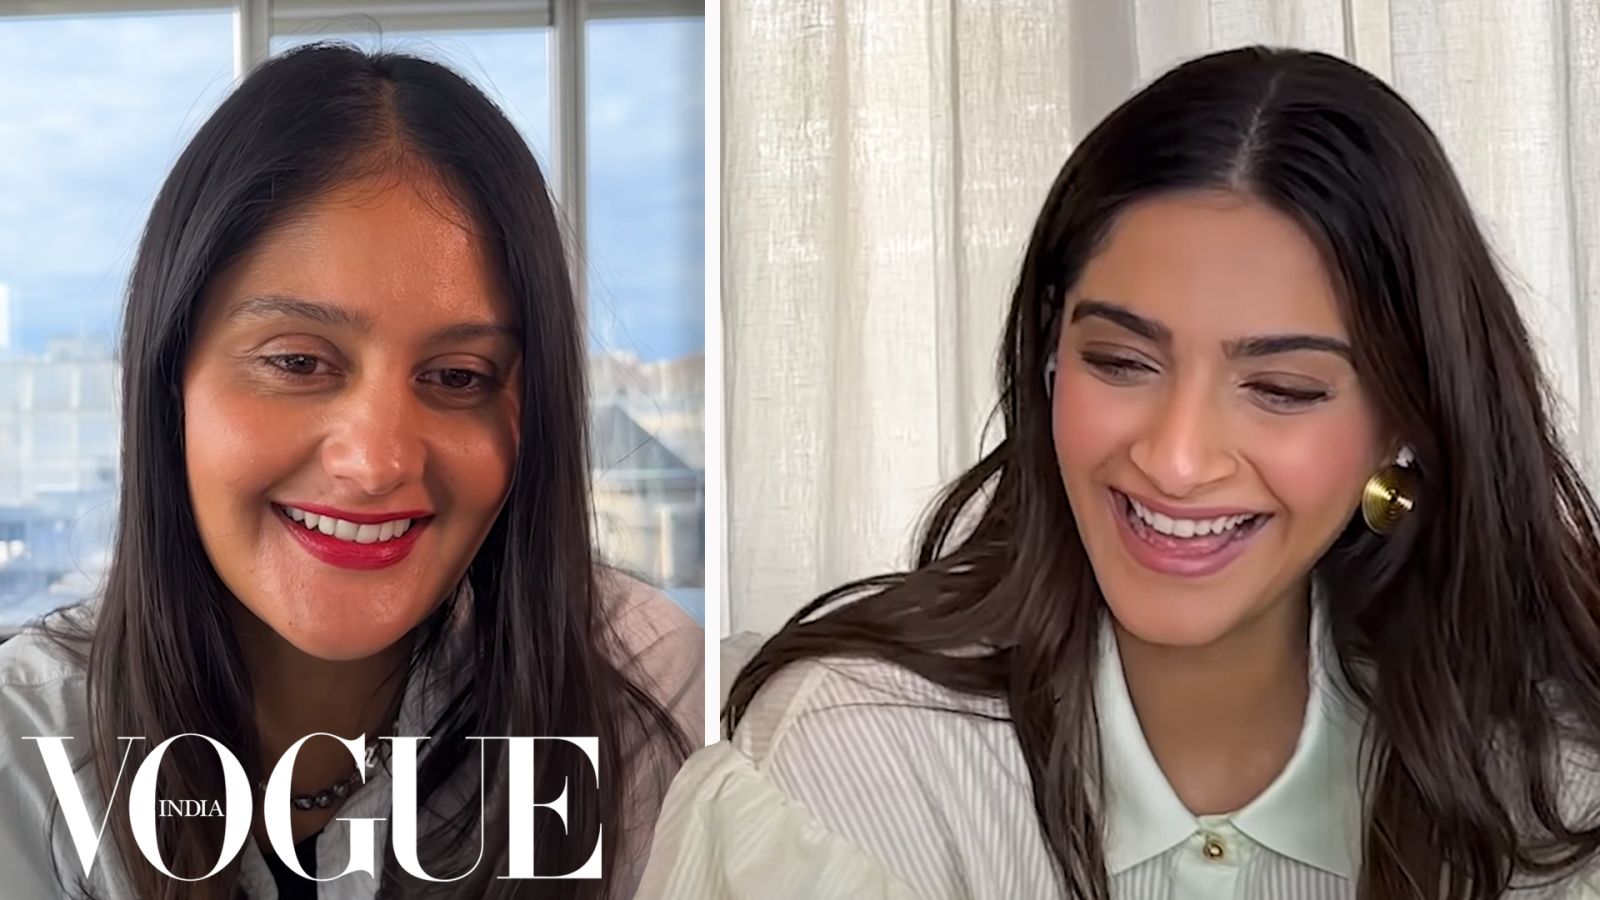 Sonam Kapoor Ahuja gets real about her pregnancy and her journey towards a healthy body image